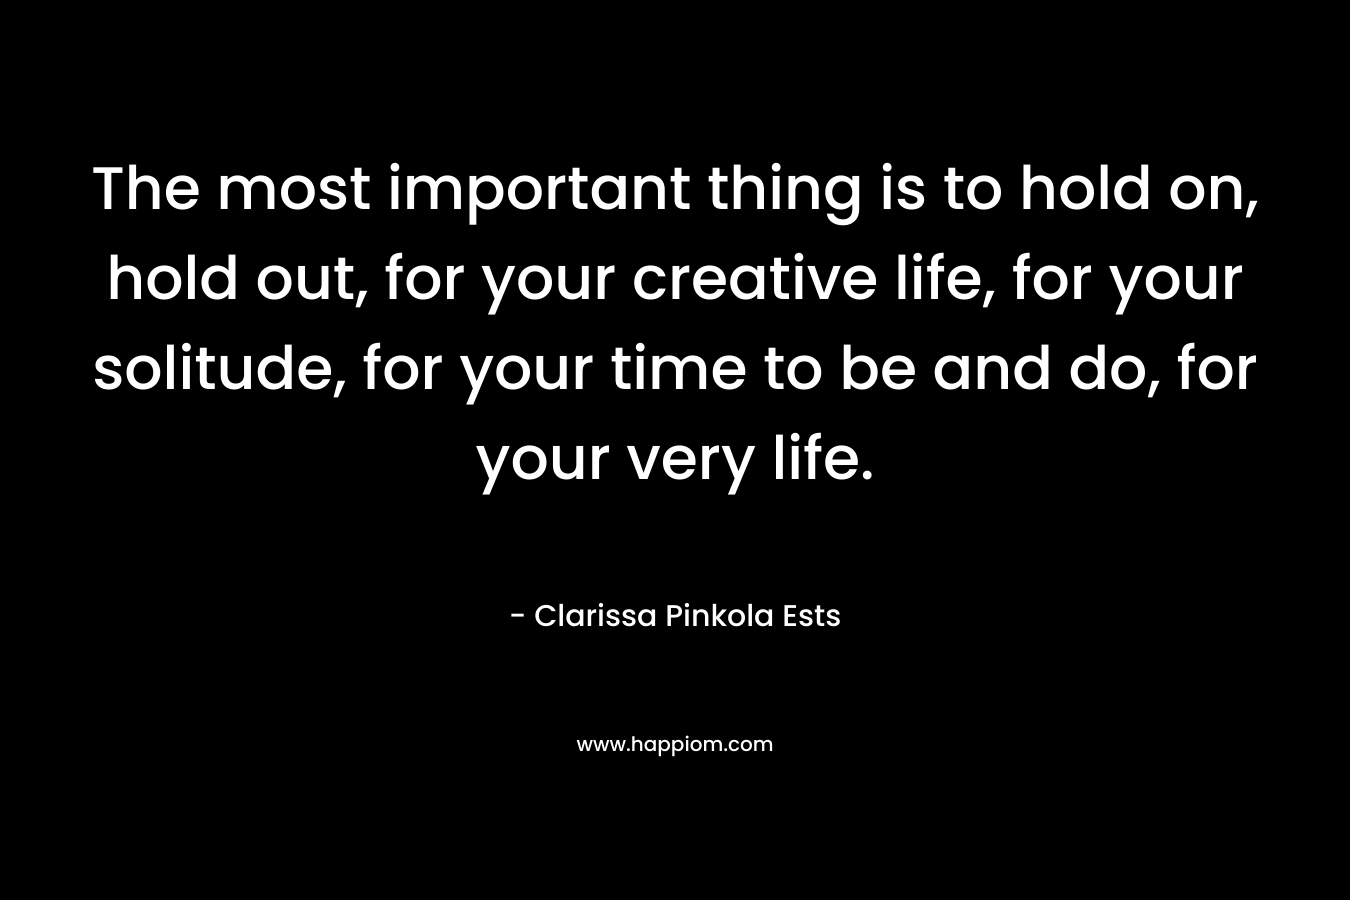 The most important thing is to hold on, hold out, for your creative life, for your solitude, for your time to be and do, for your very life.